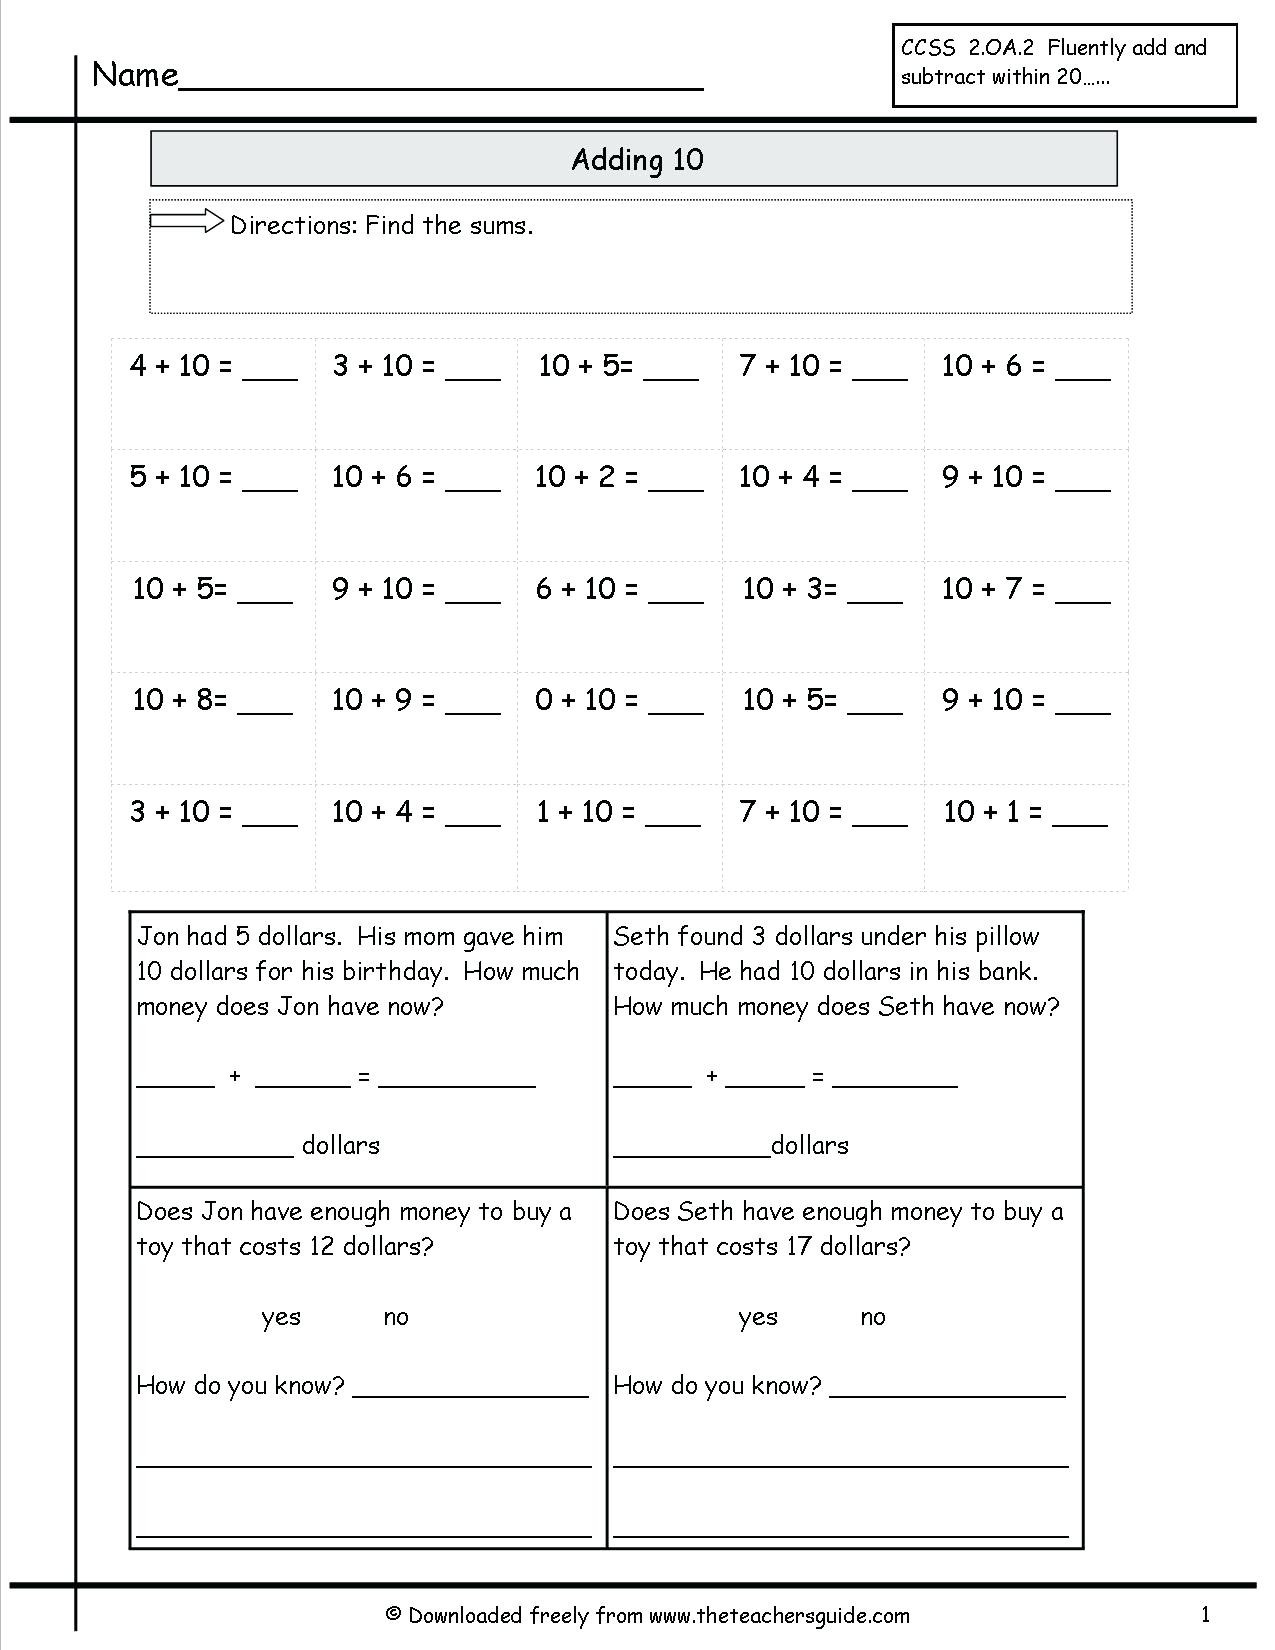 Free Math Worksheets First Grade 1 Subtraction Add and Subtract 4 Single Digit Numbers